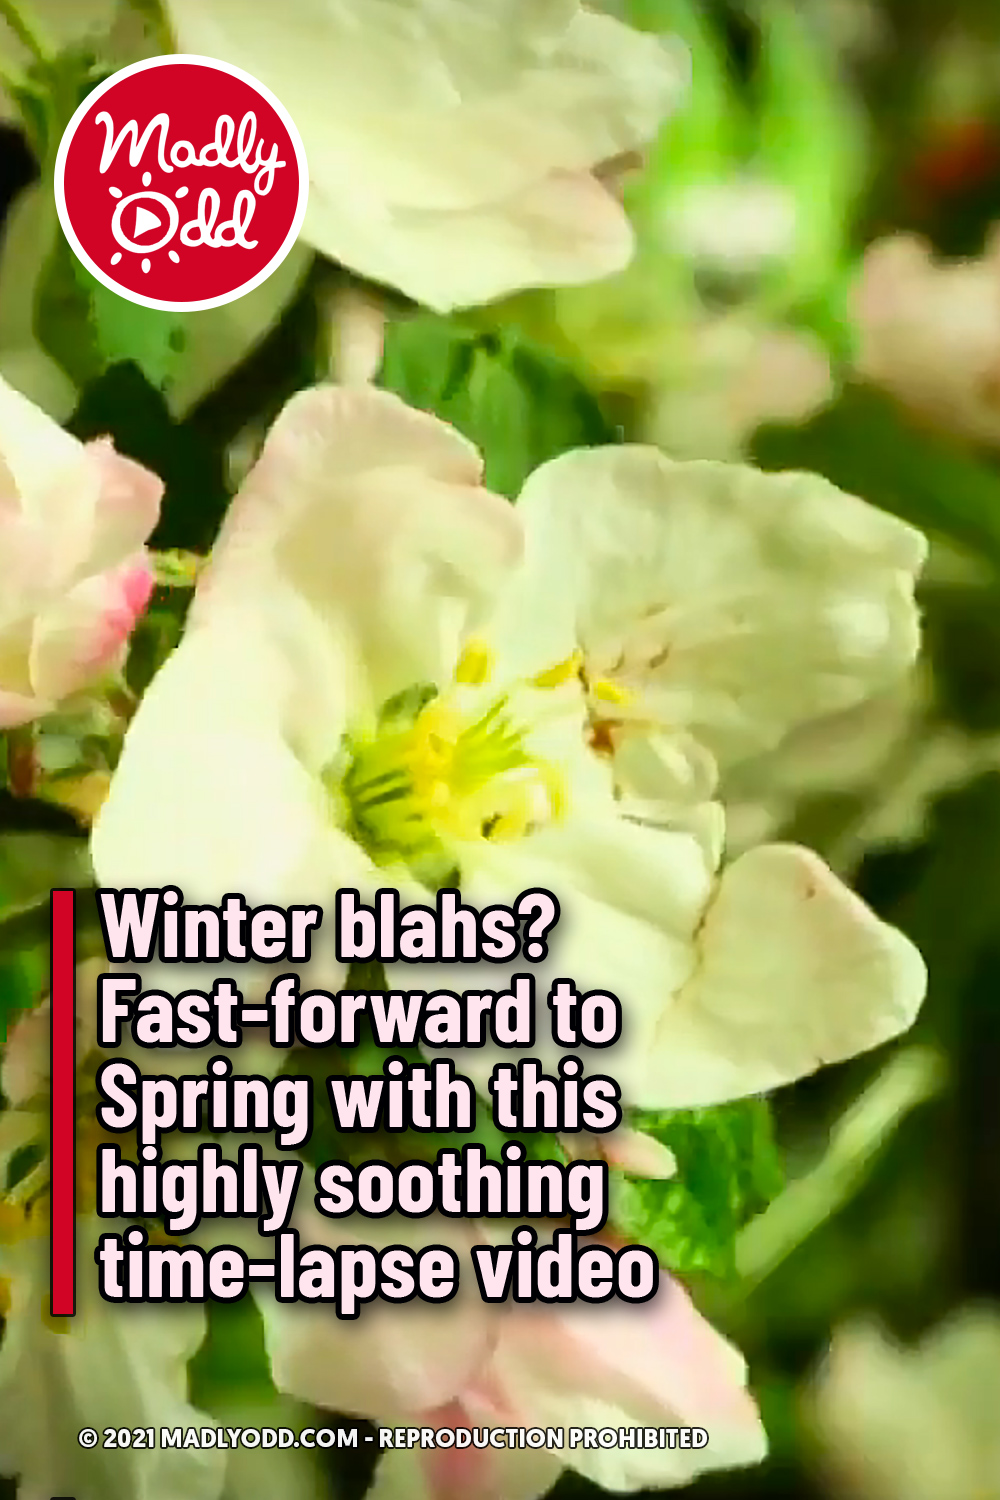 Winter blahs? Fast-forward to Spring with this highly soothing time-lapse video